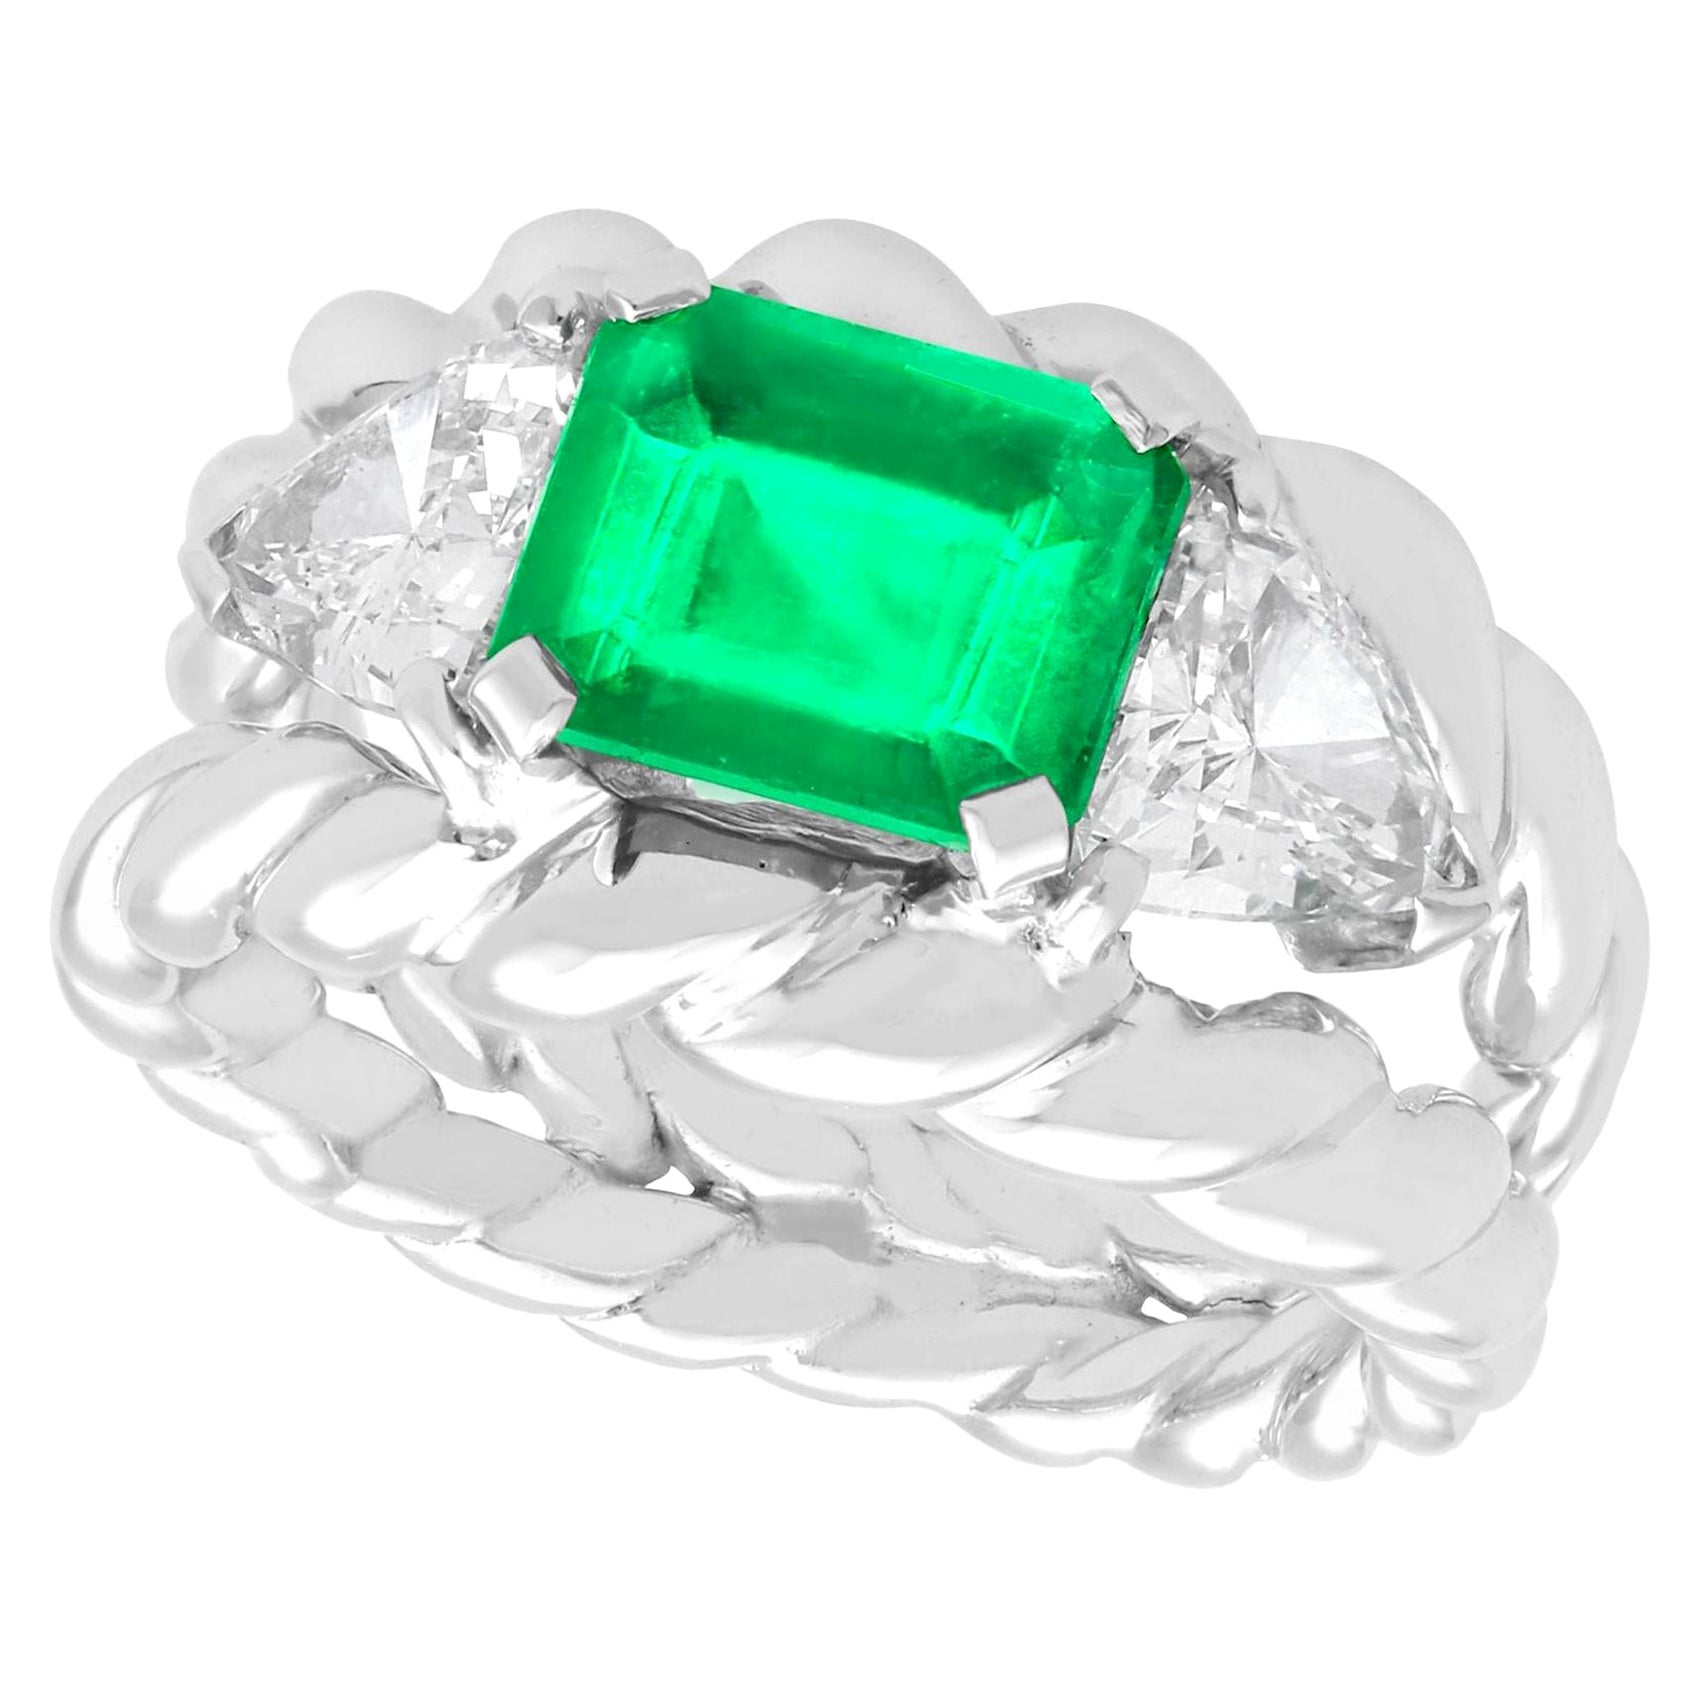 Vintage 1.64ct Emerald Cut Colombian Emerald and Diamond White Gold Ring